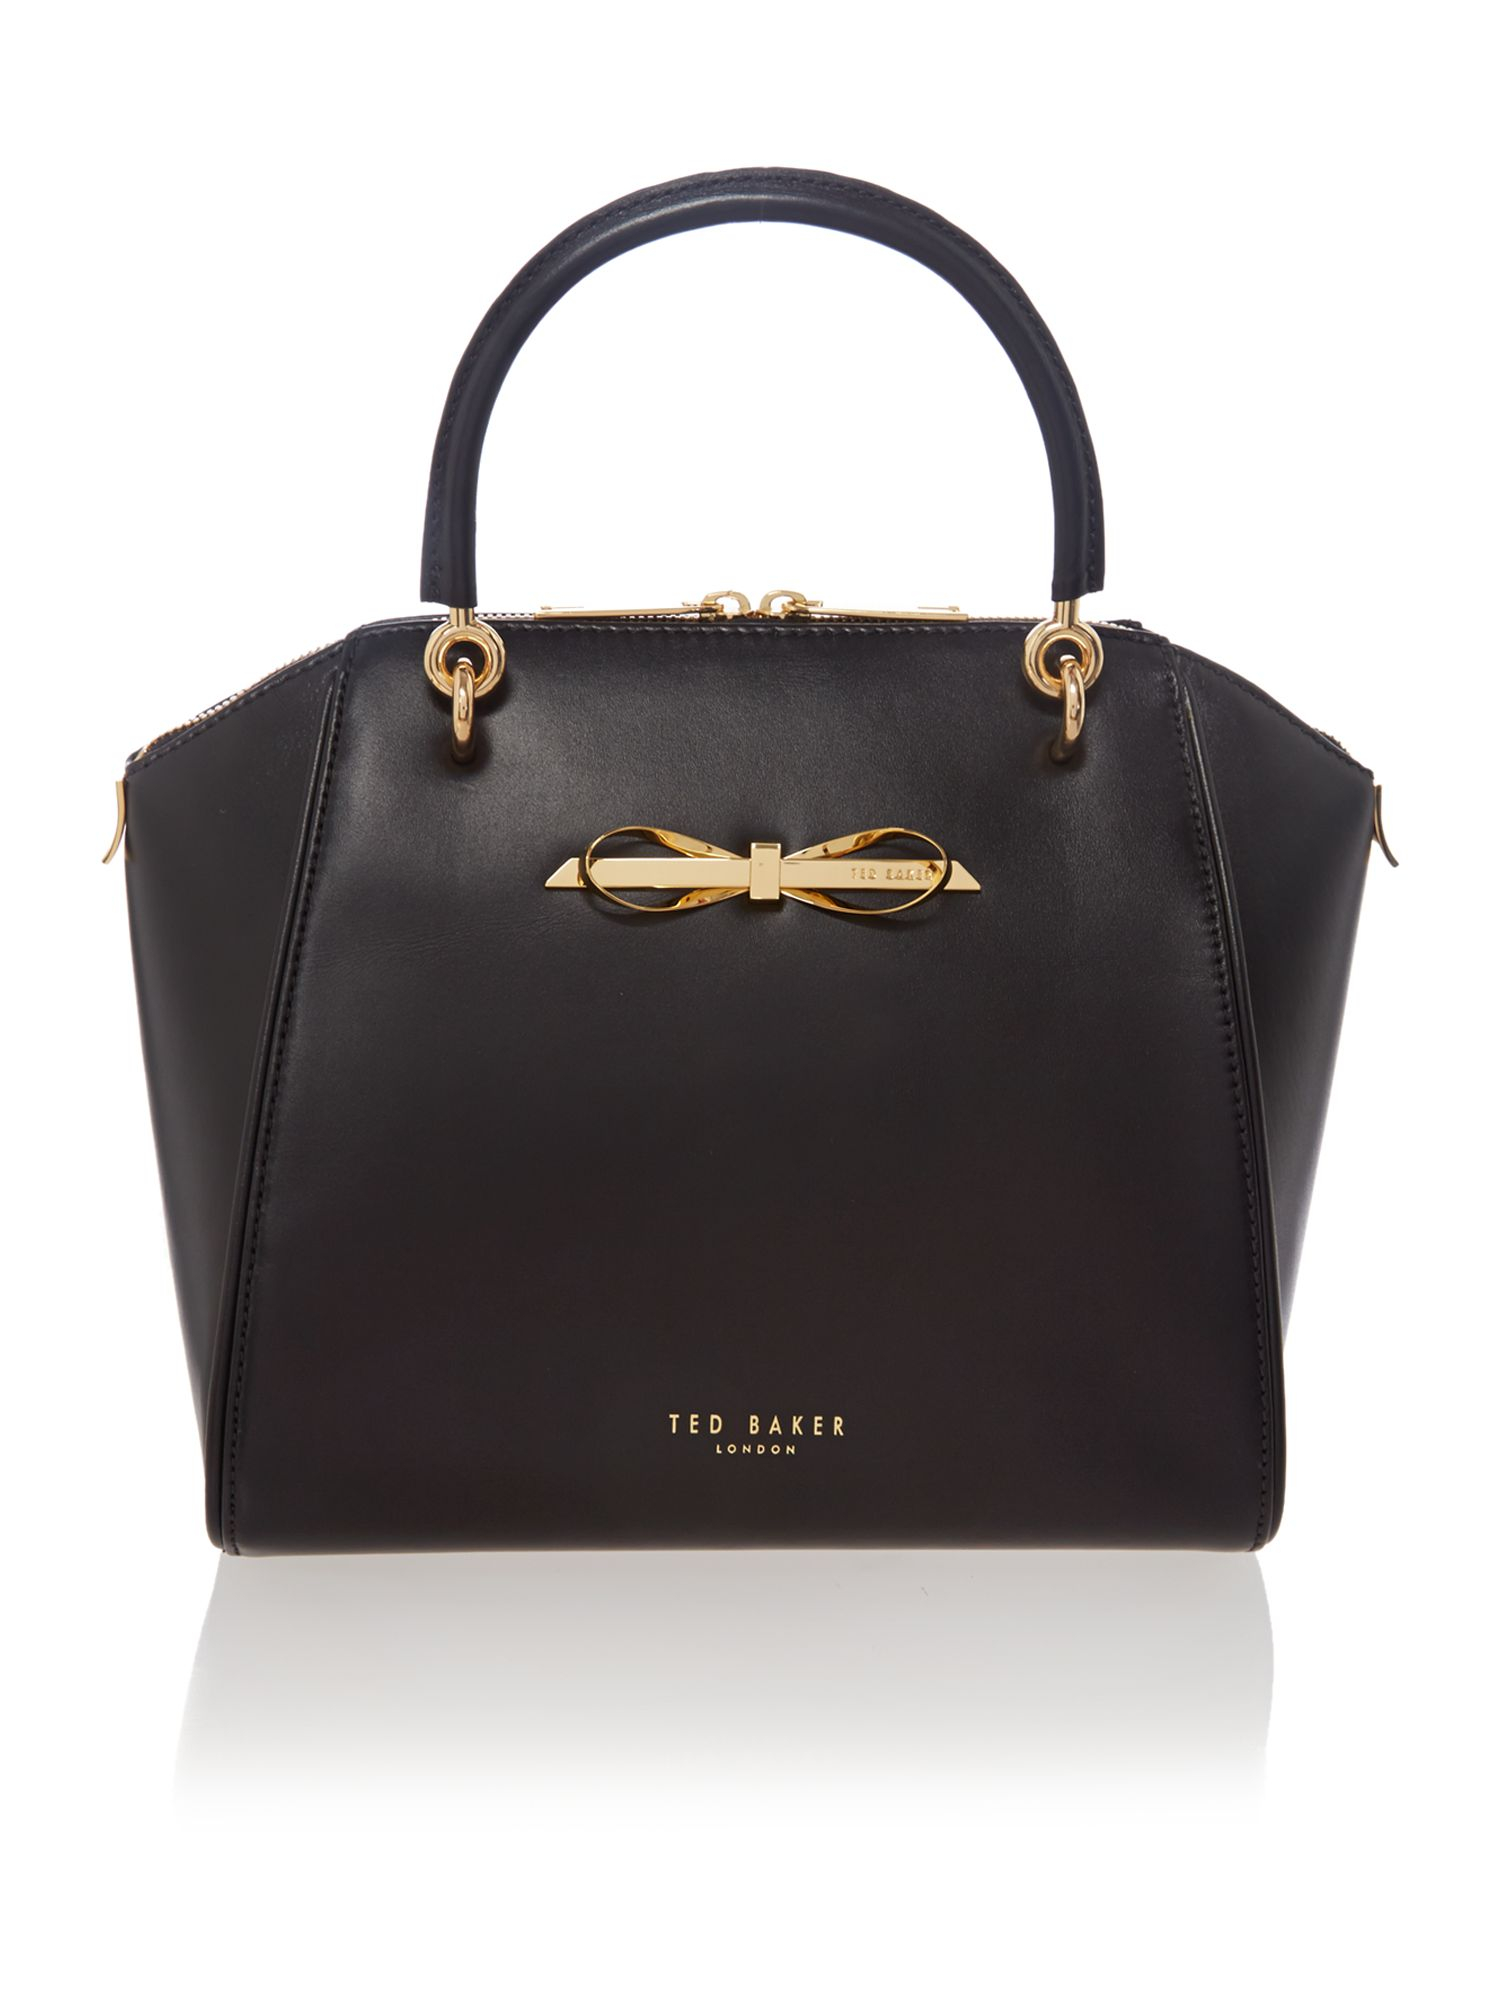 Ted baker Black Small Metal Bow Leather Tote Bag in Black | Lyst